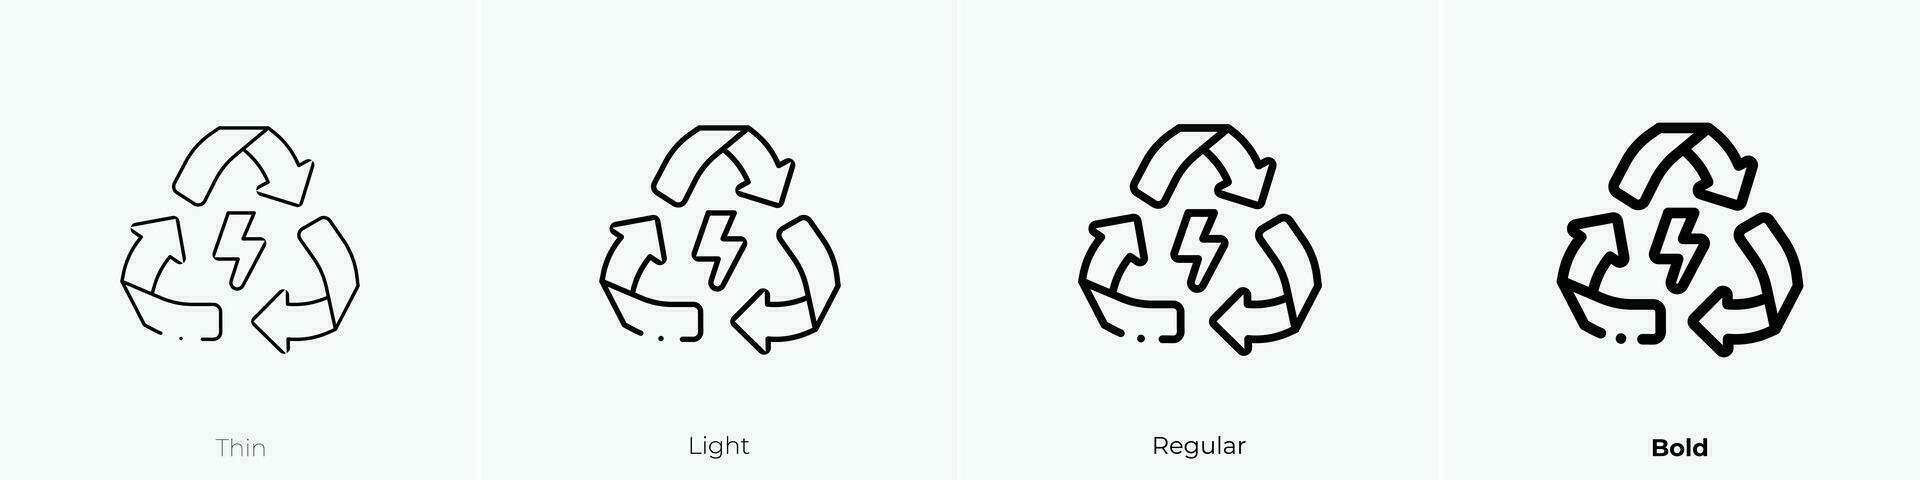 recycle icon. Thin, Light, Regular And Bold style design isolated on white background vector